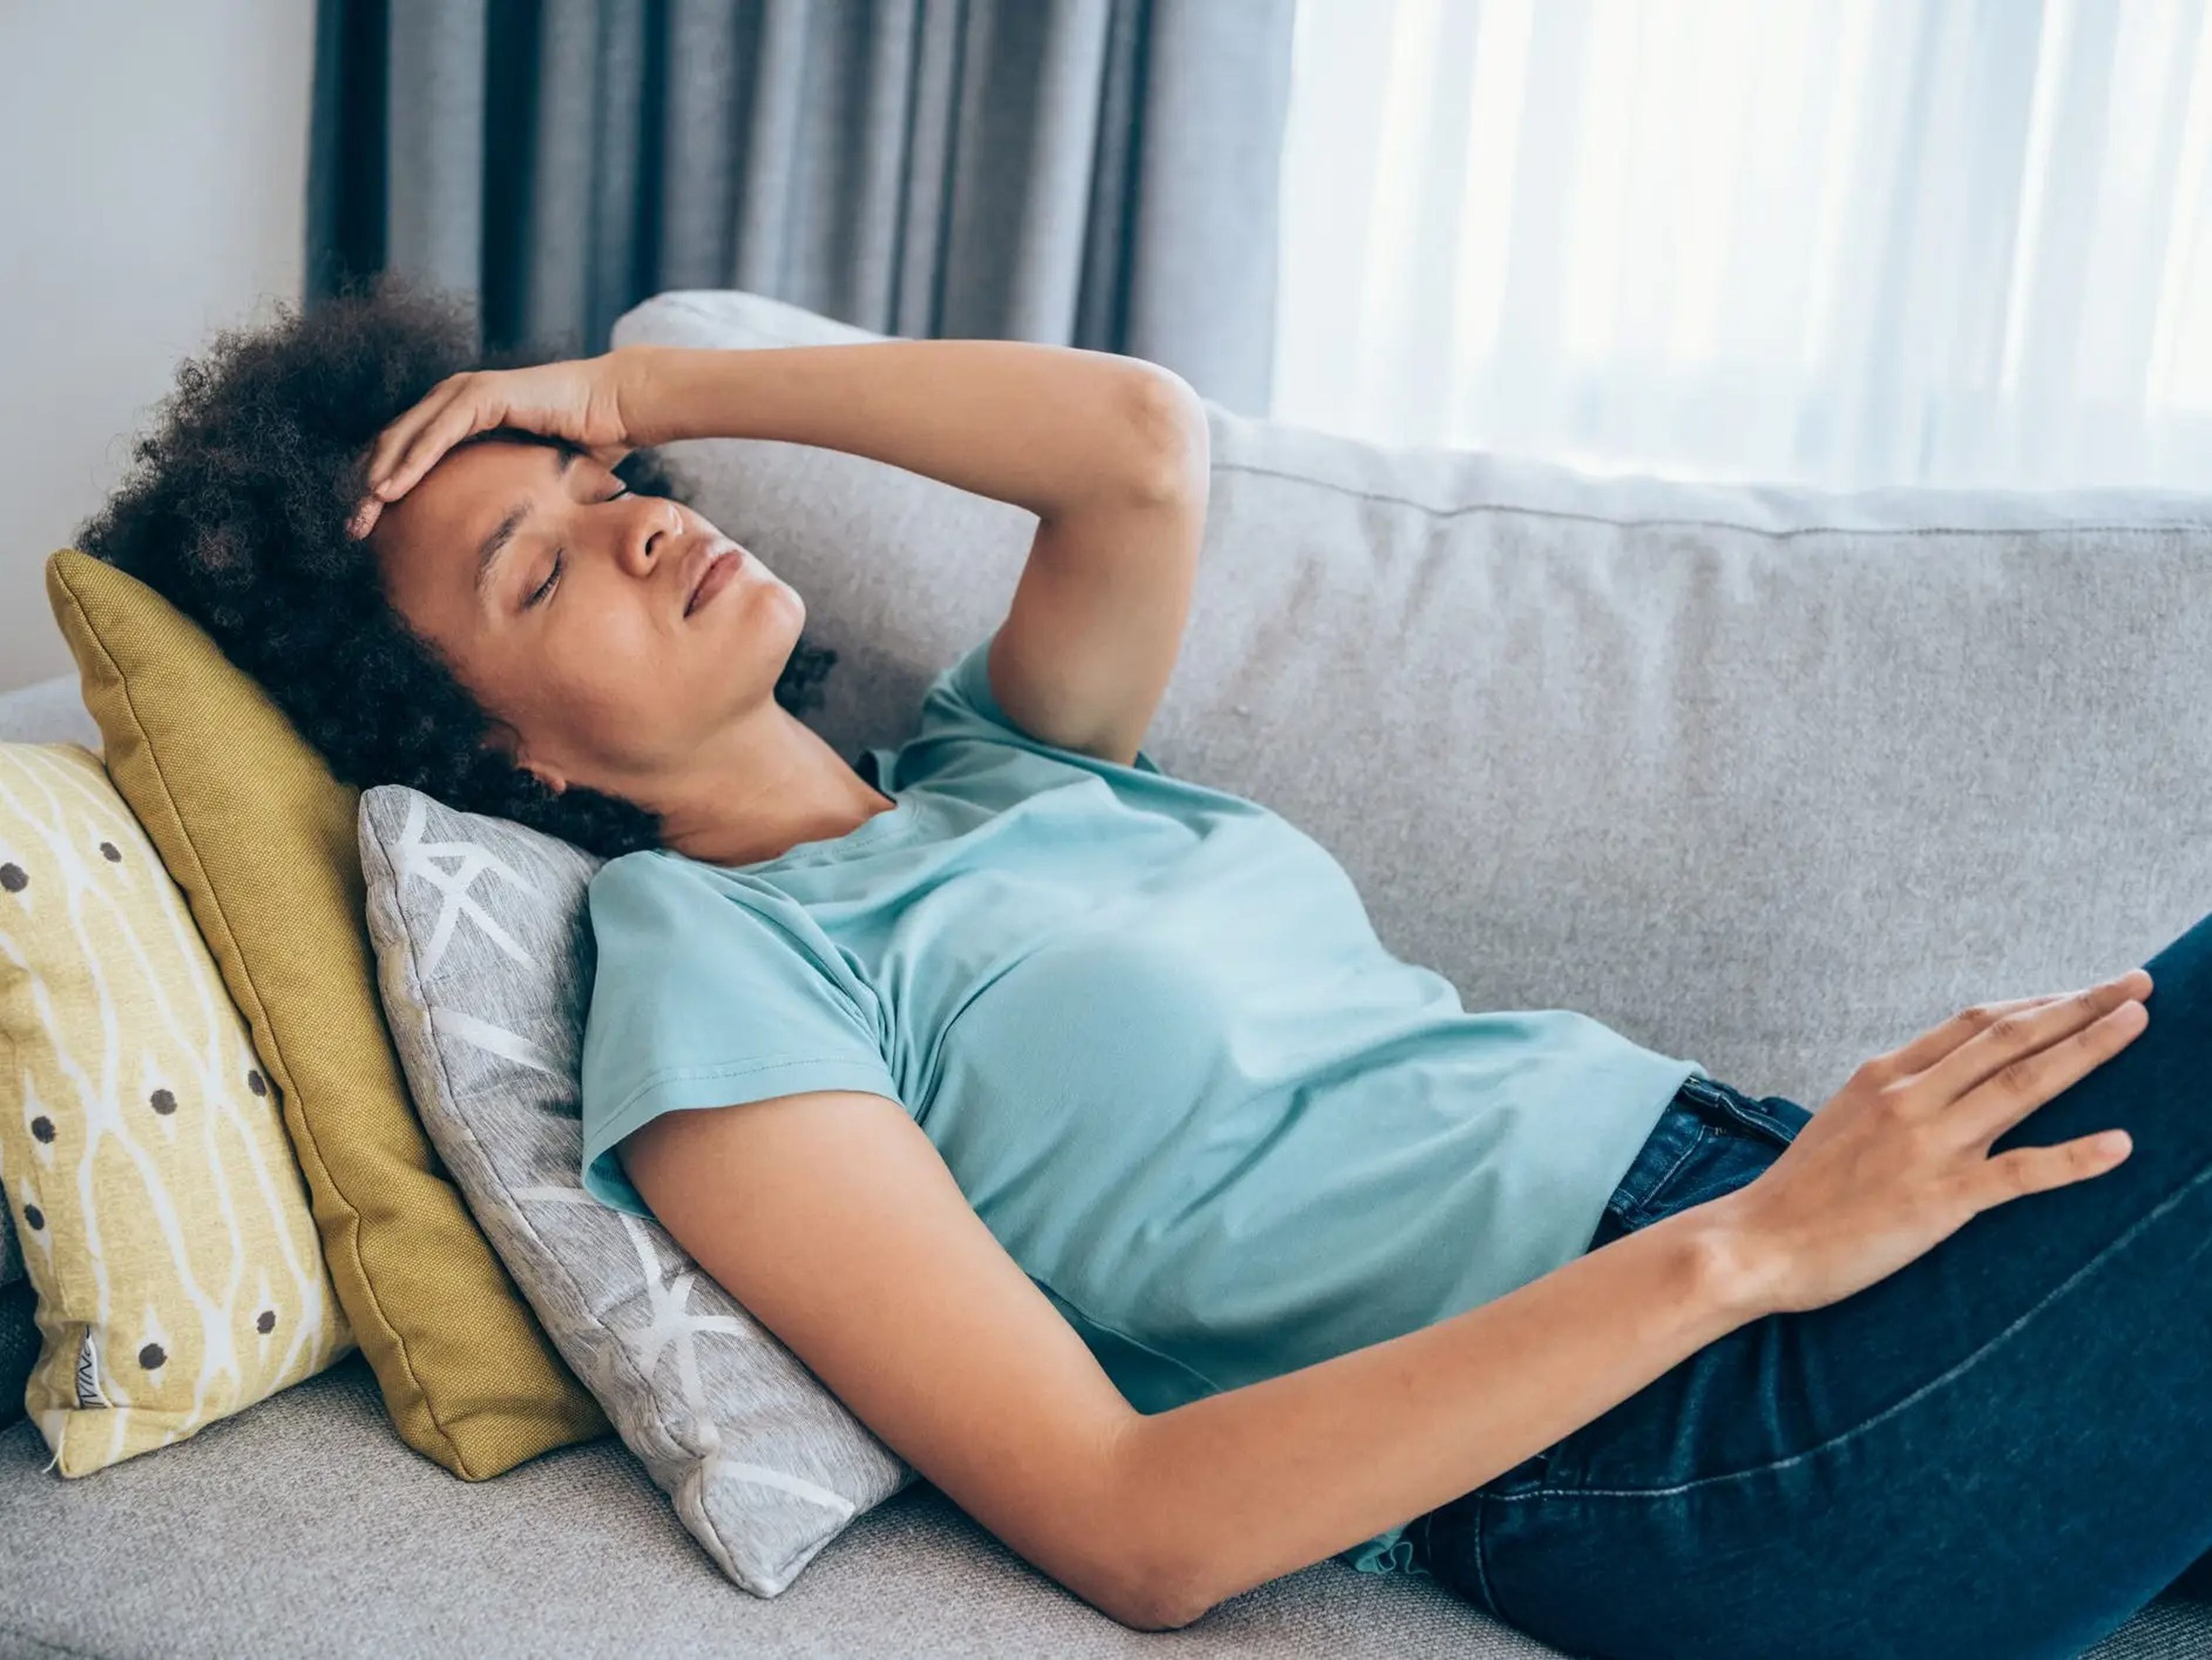 a woman laying on a couch looking ill and putting her hand to her forehead